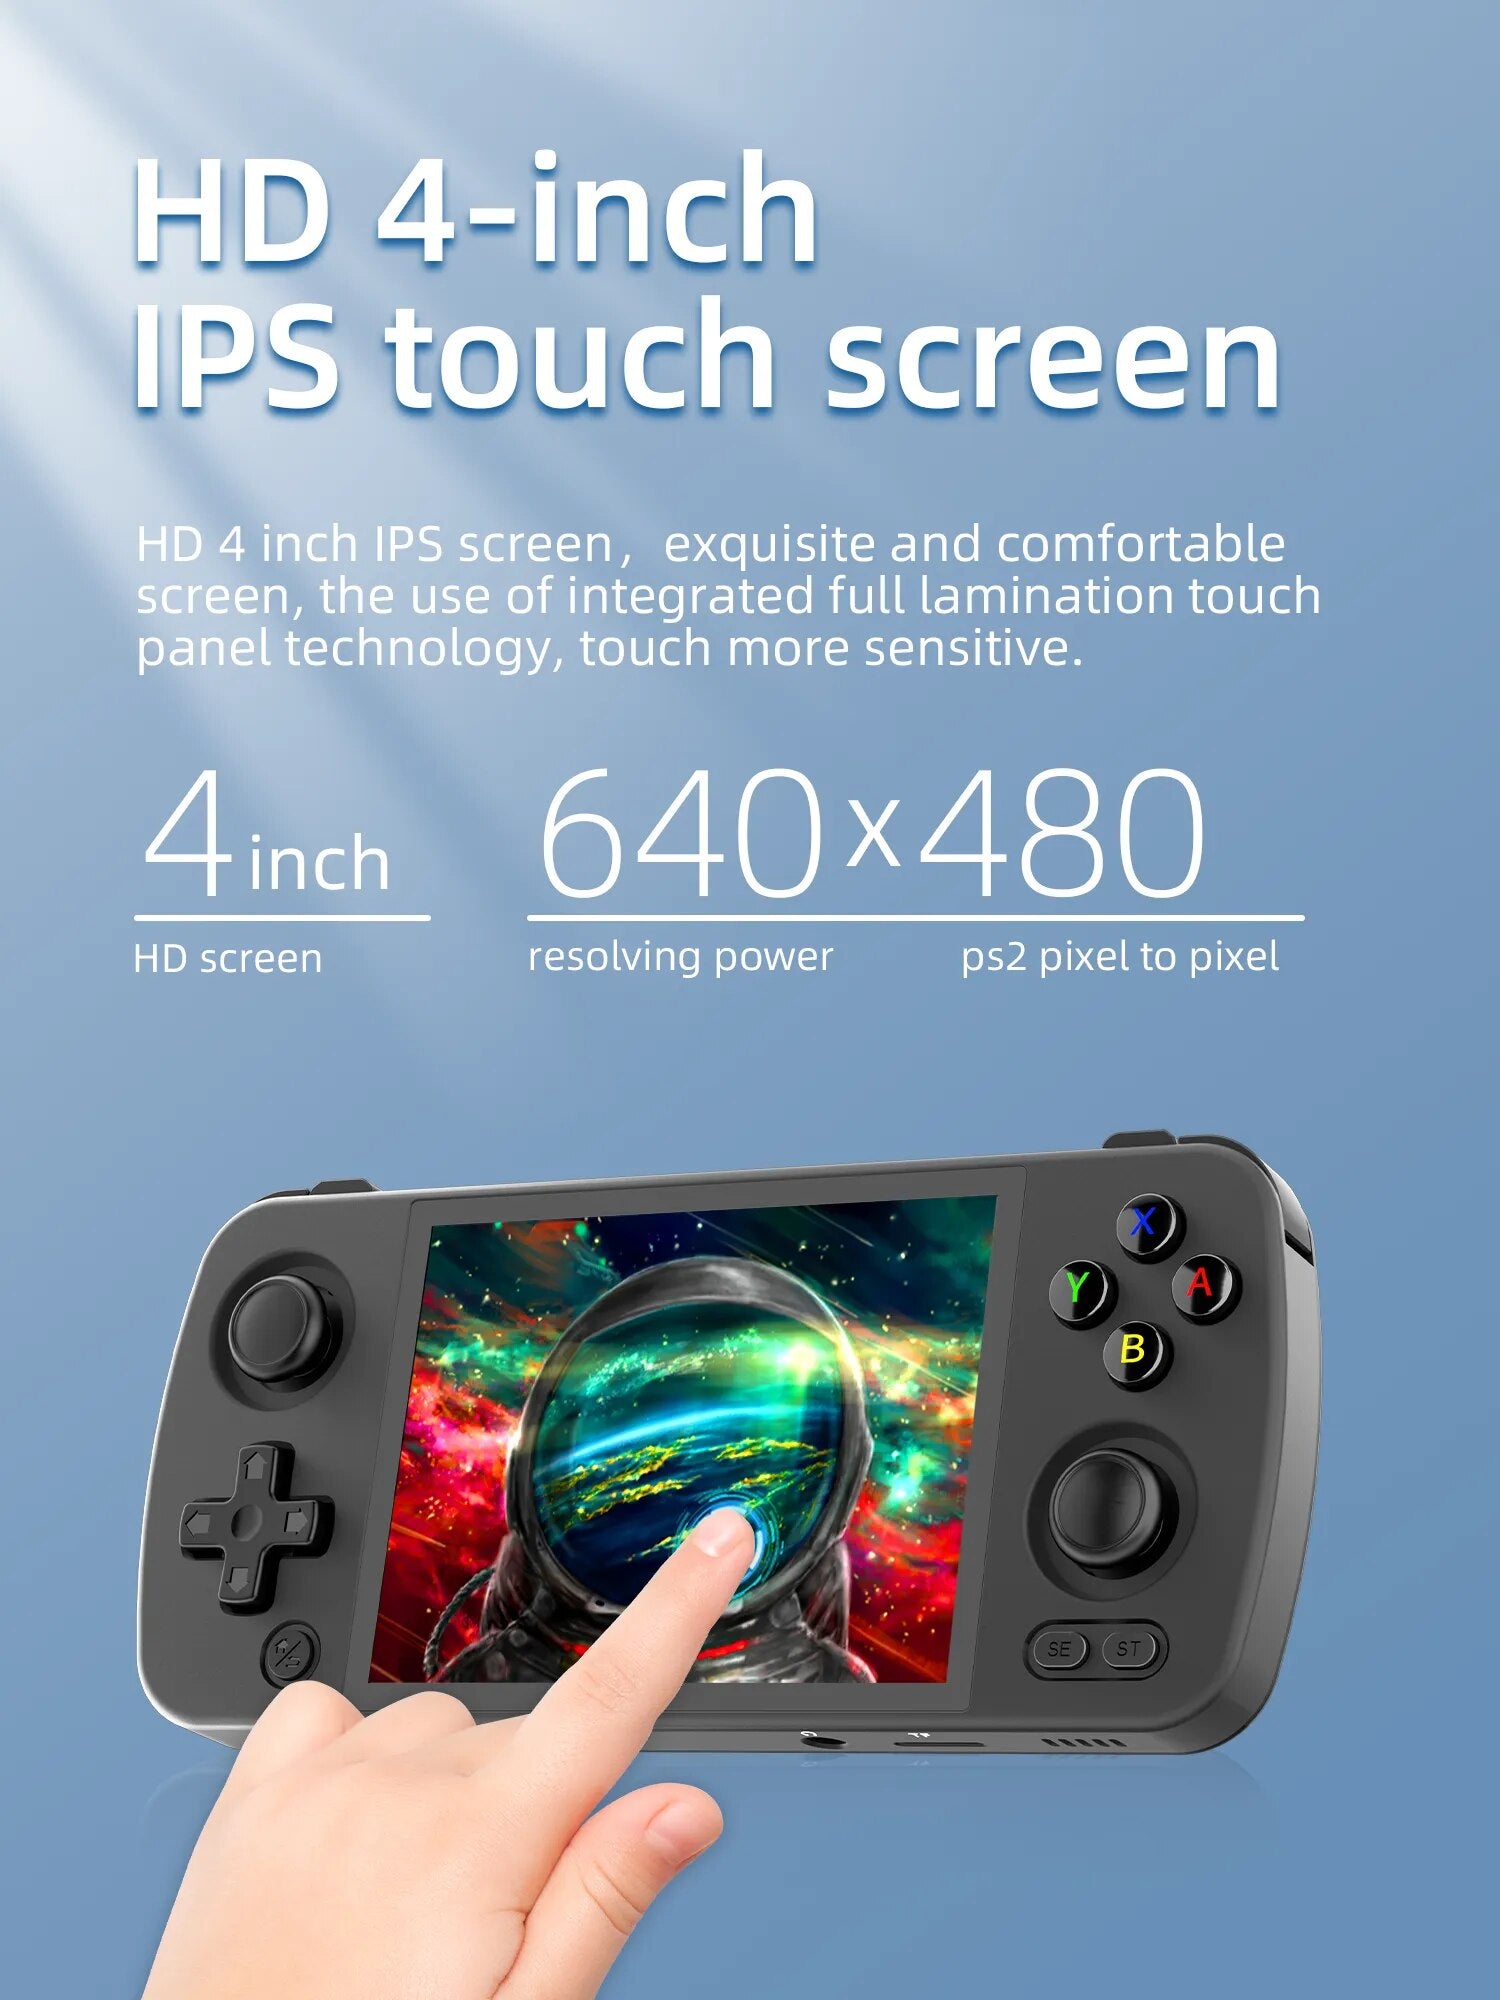 ANBERNIC RG405M Metal Handheld Game Console Android 12 System Unisoc Tiger T618 4 Inch IPS Screen Game Player Support OTA Update